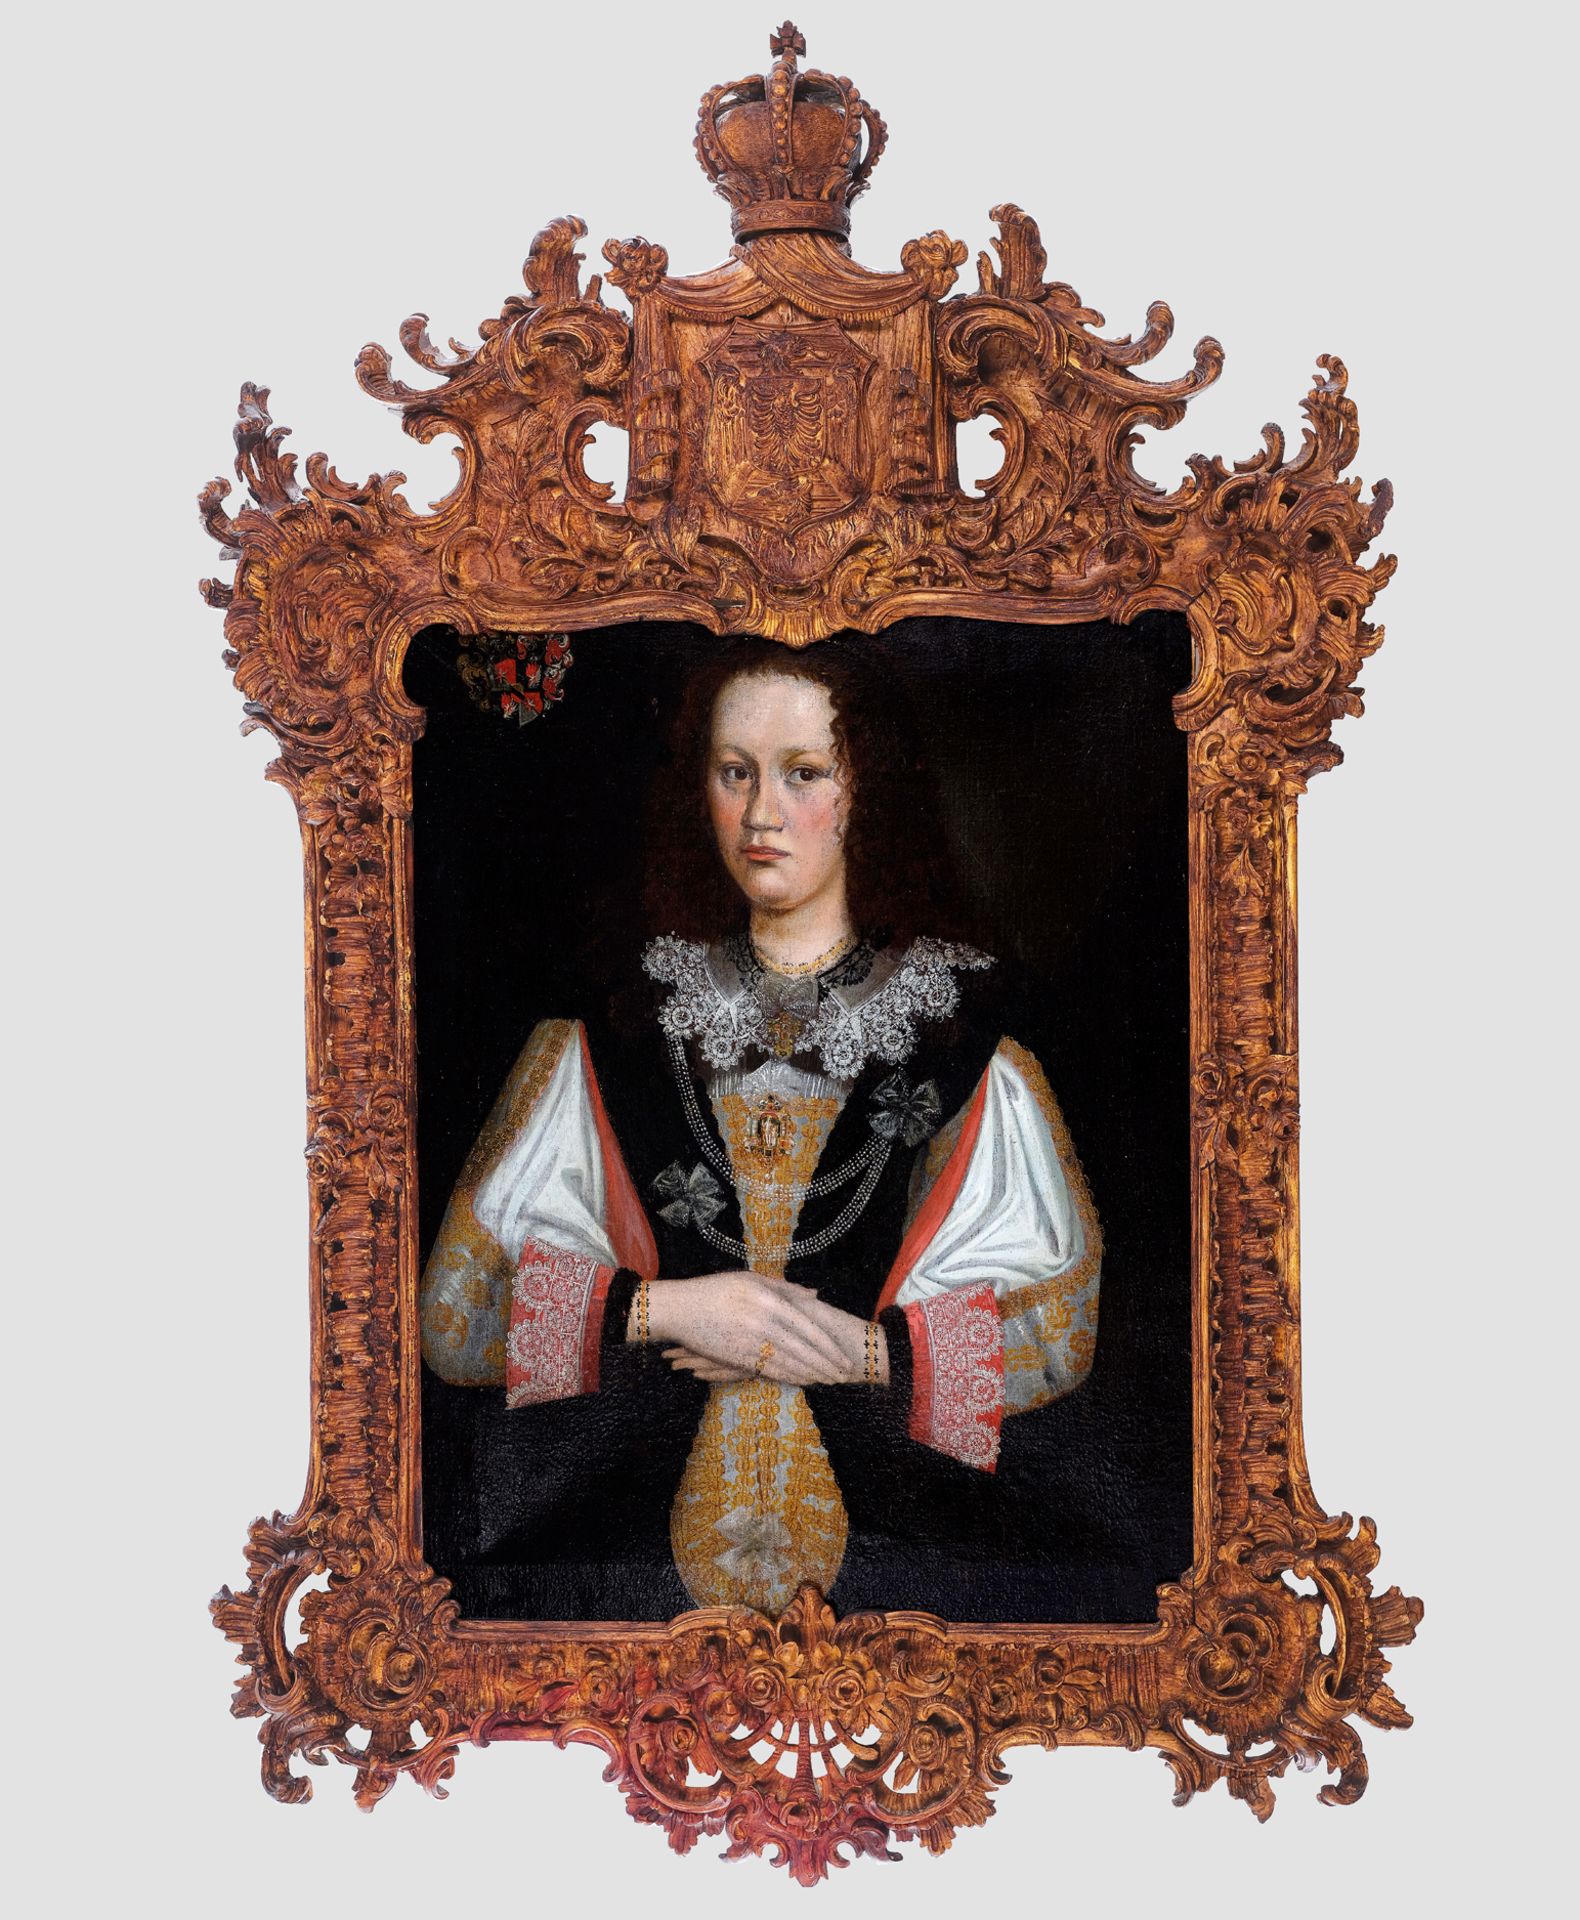 Austria 1601, Portrait of a Lady of Sigersdorf, Oil on canvas